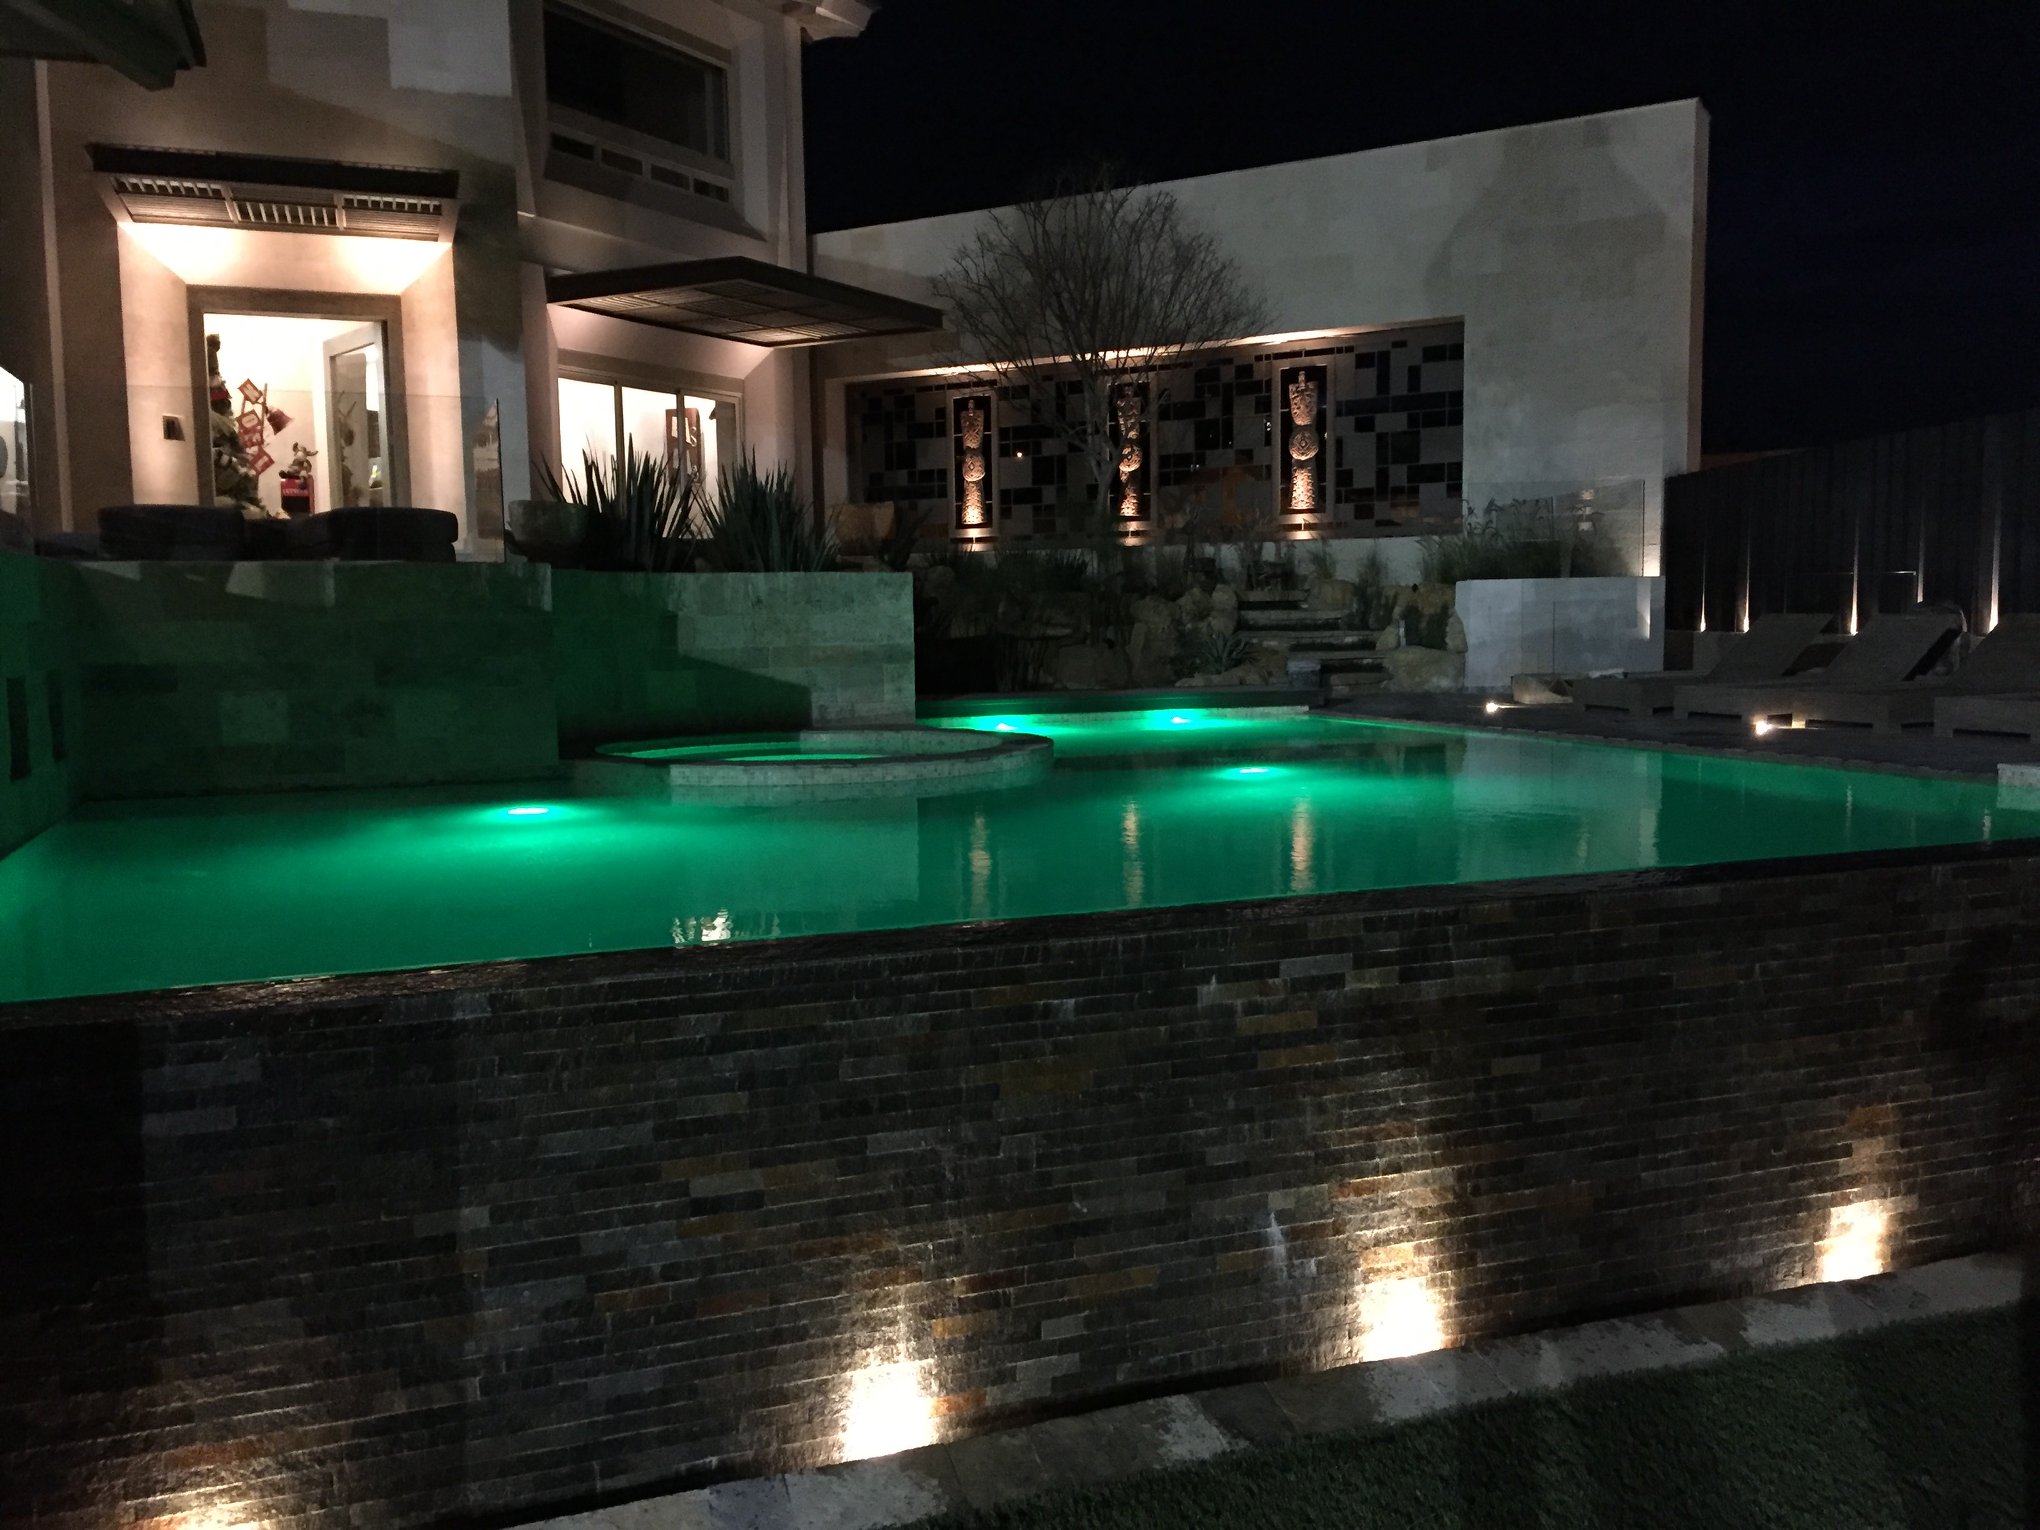 Penetron partner: 3 Cincuentayuno Luxury Pools, based in Monterrey, México, designs and builds “aquatic spaces,” or rather, pools as architectural and ornamental (and waterproofed) elements.